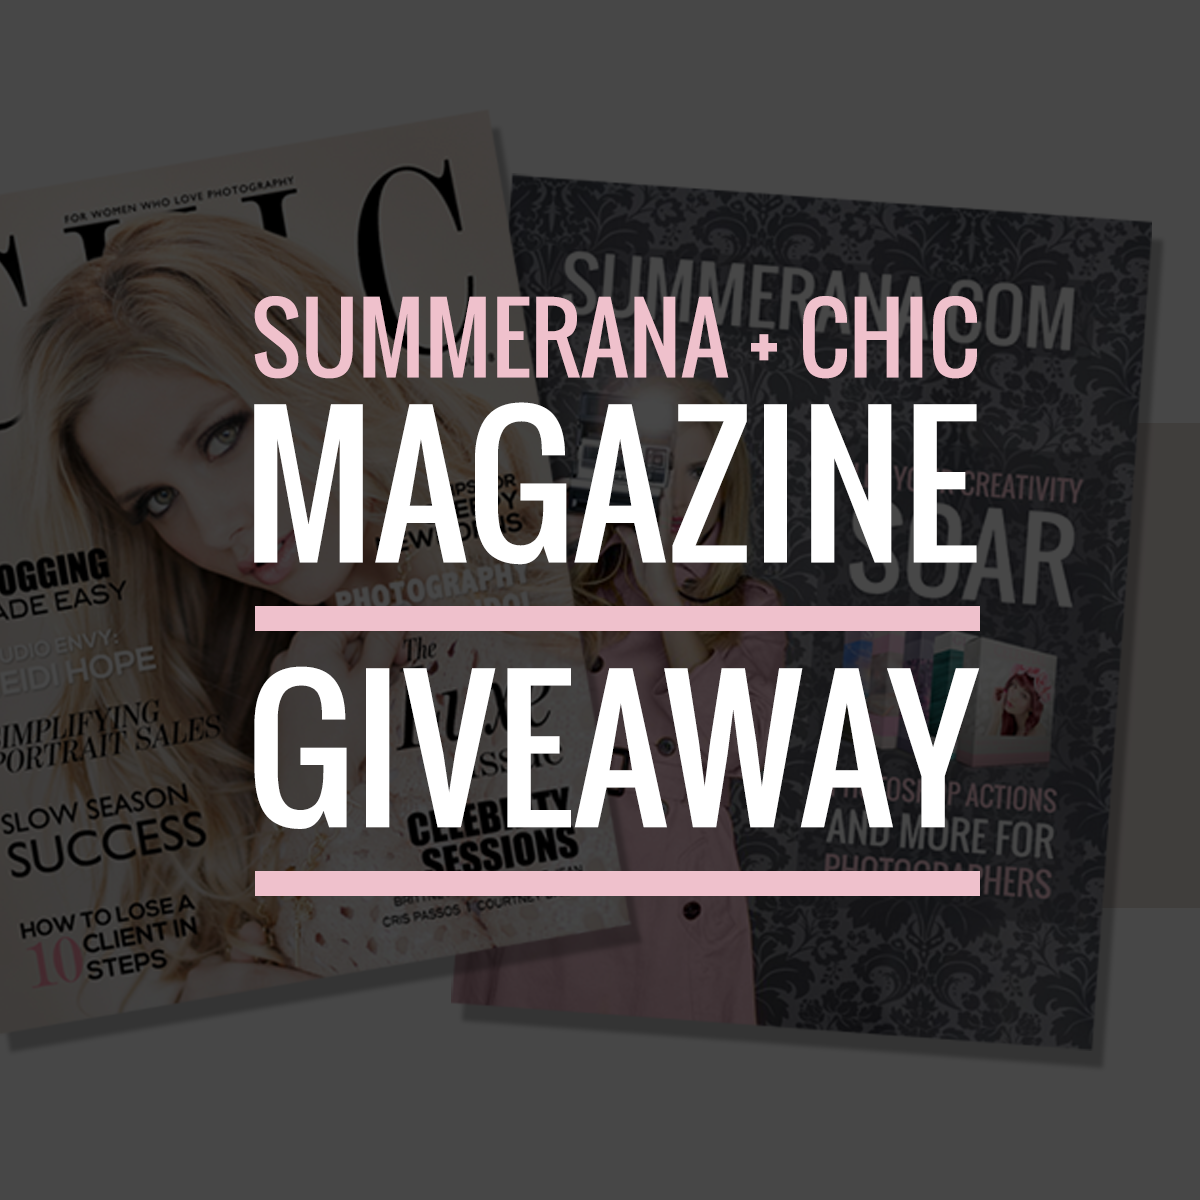 Chic Plus Summerana Magazine and Shop Giveaway